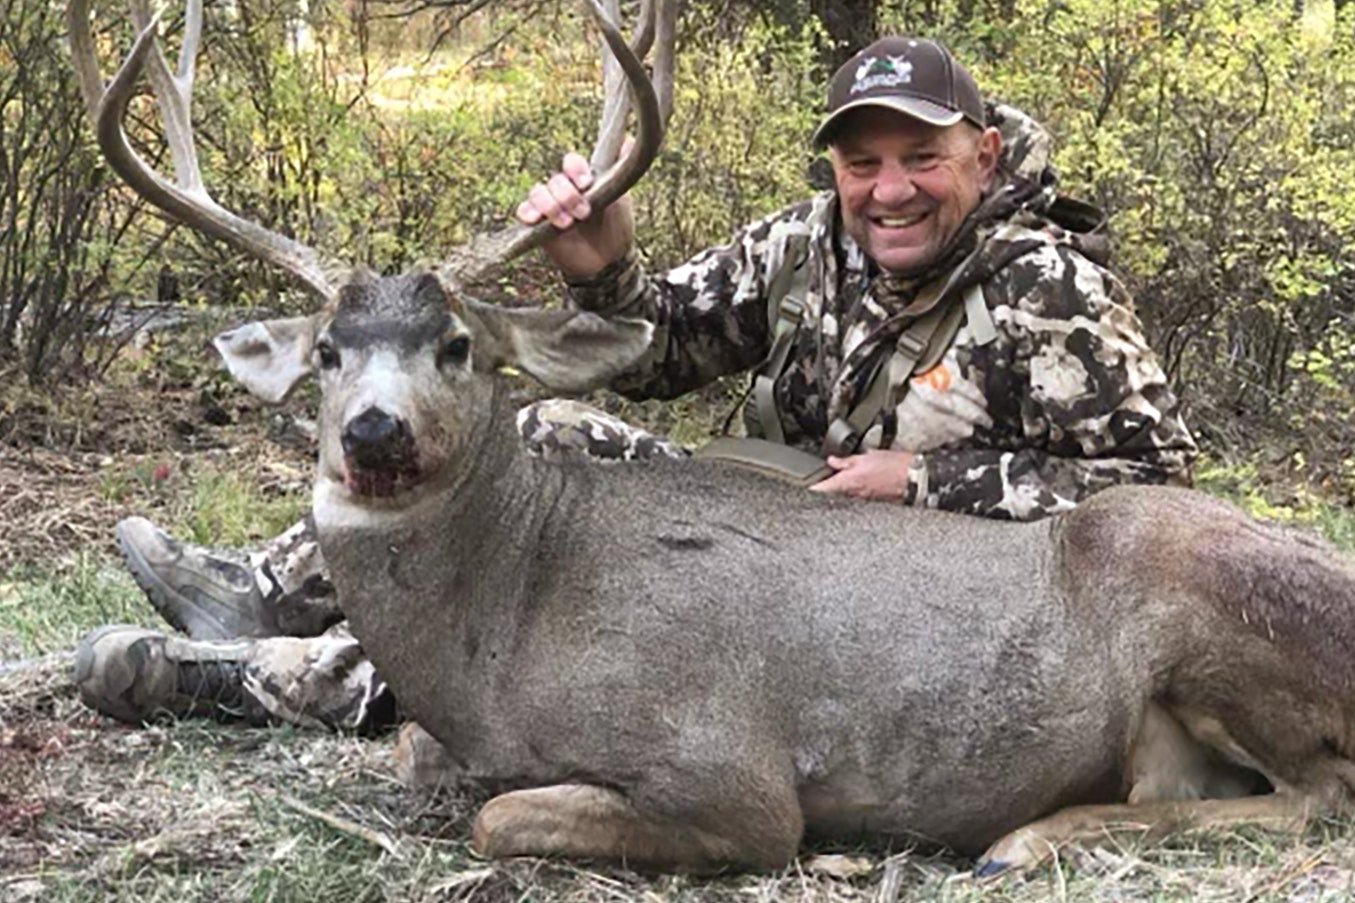 Joe Capone of Ohio has hunted Western big game, including this huge New Mexico mule deer buck. He hopes to hunt Wyoming next.